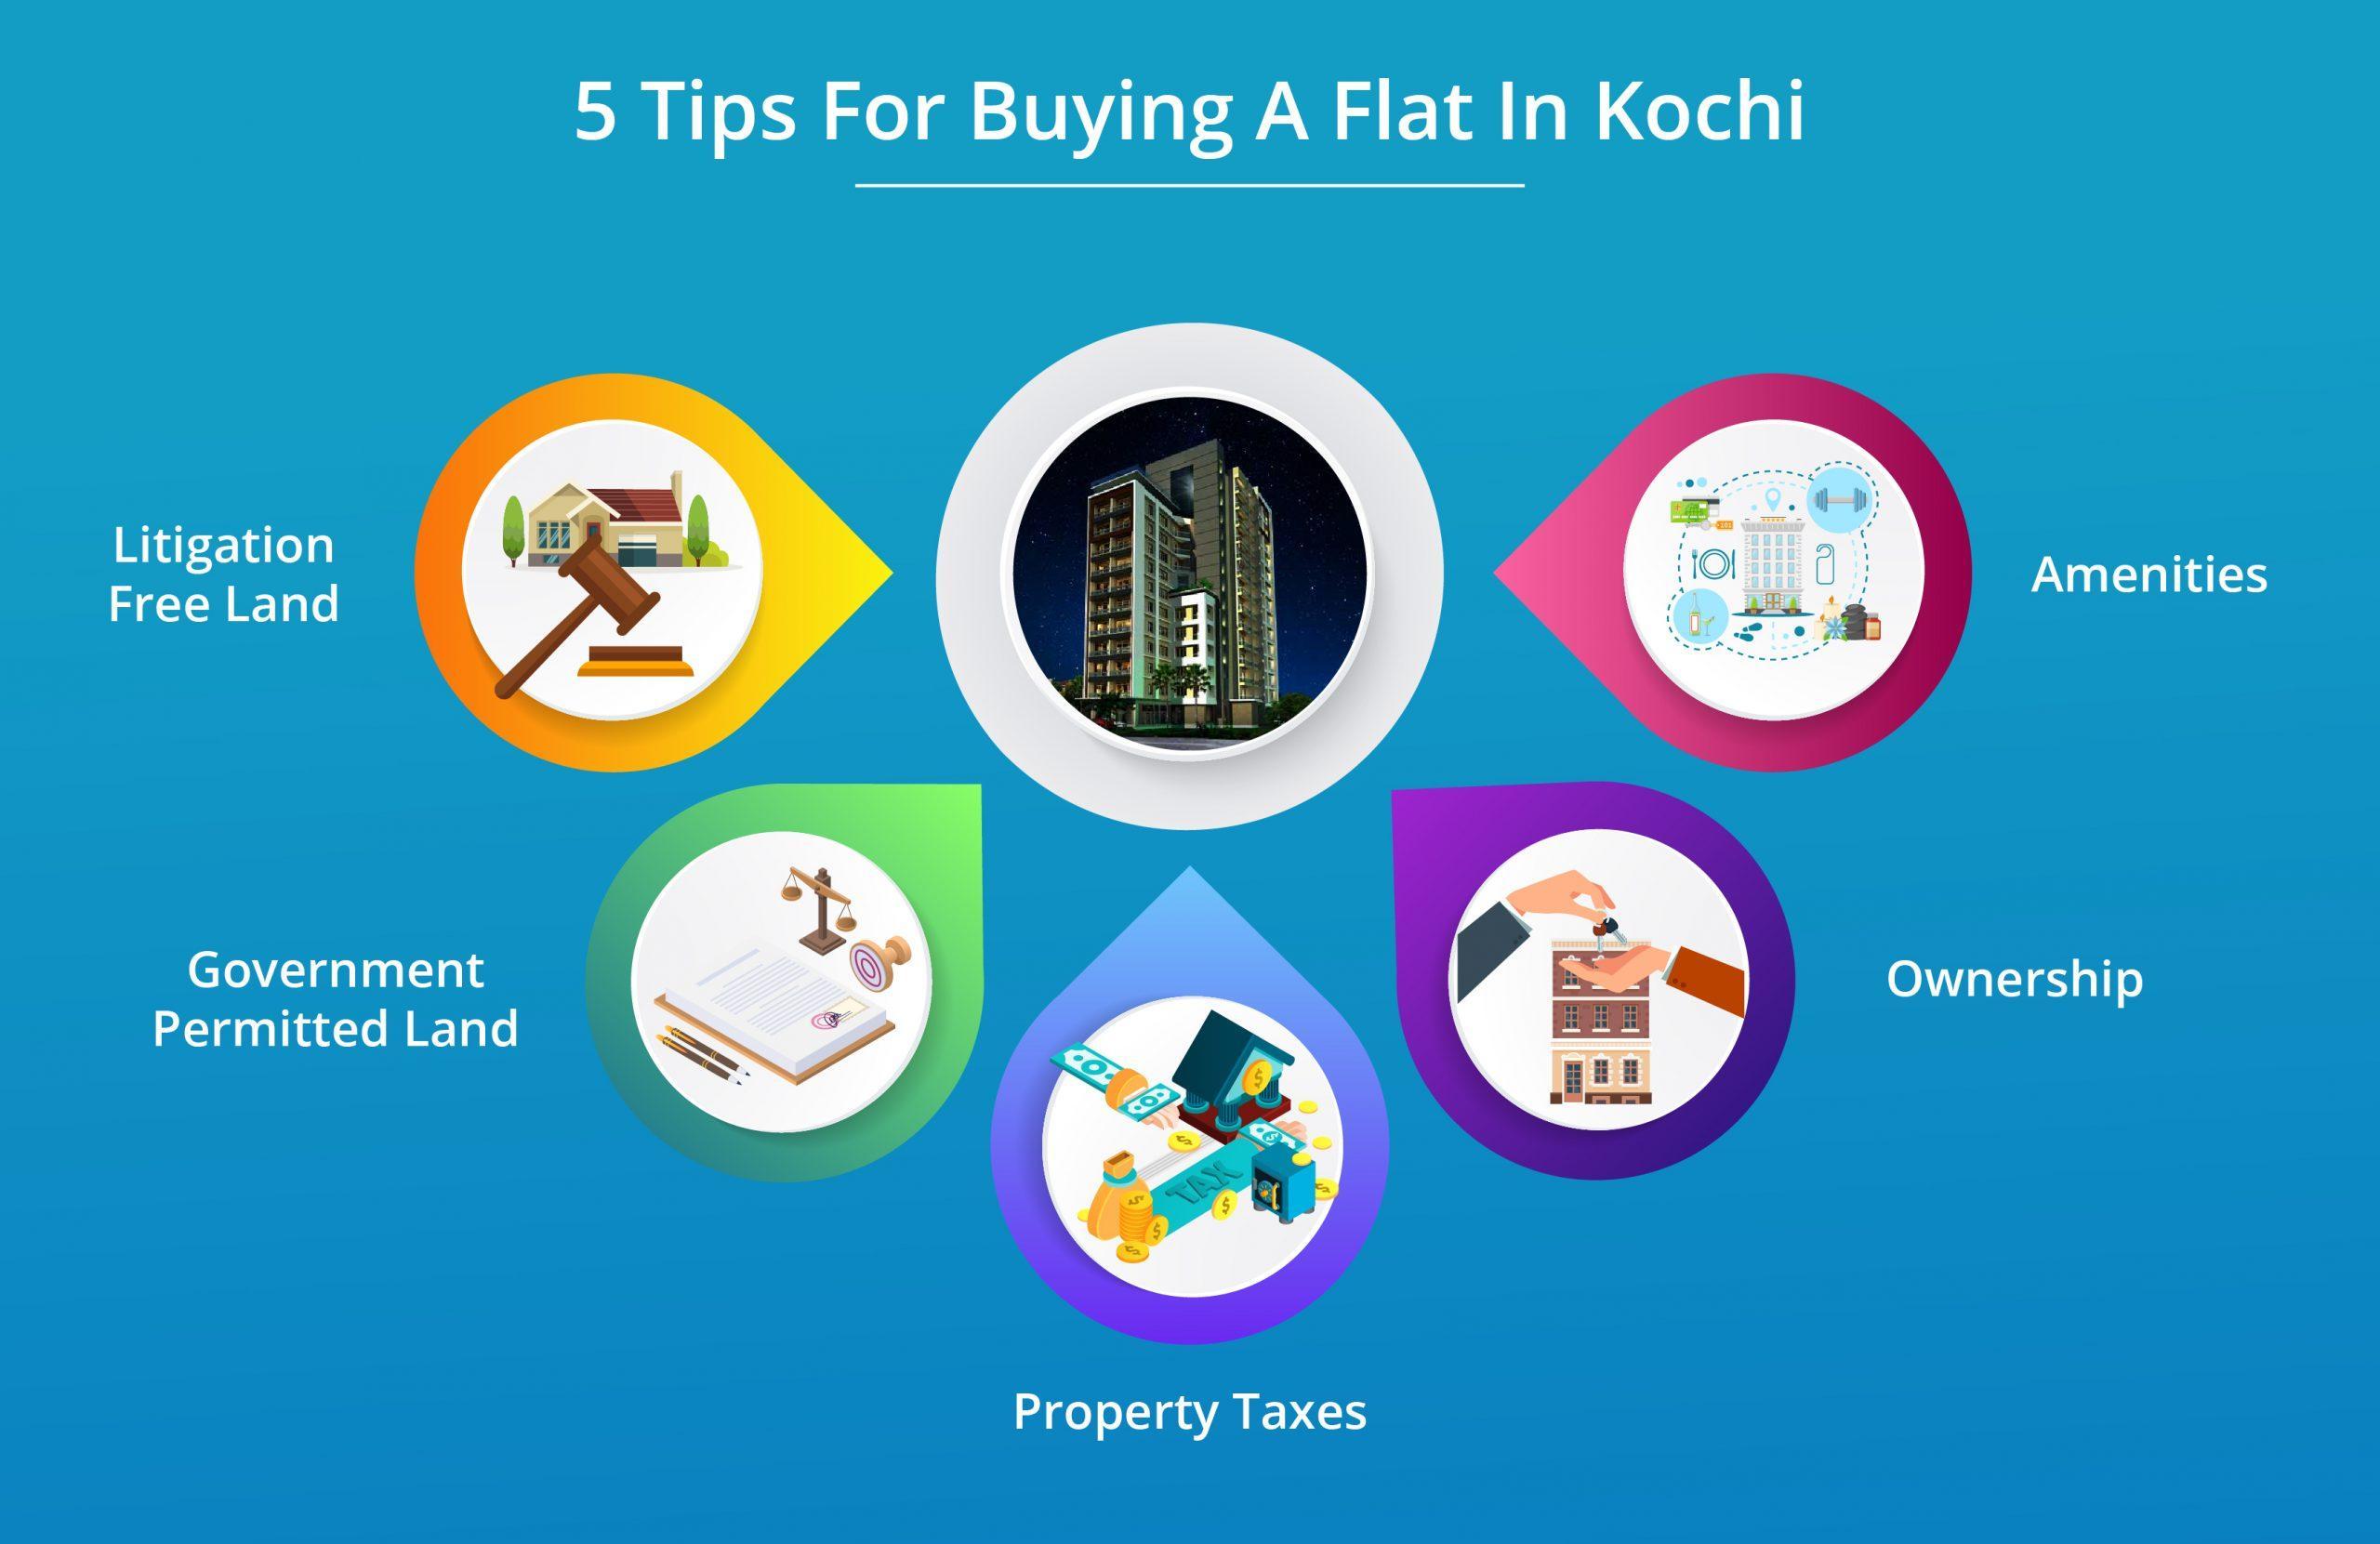 5 Tips For Buying A Flat In Kochi